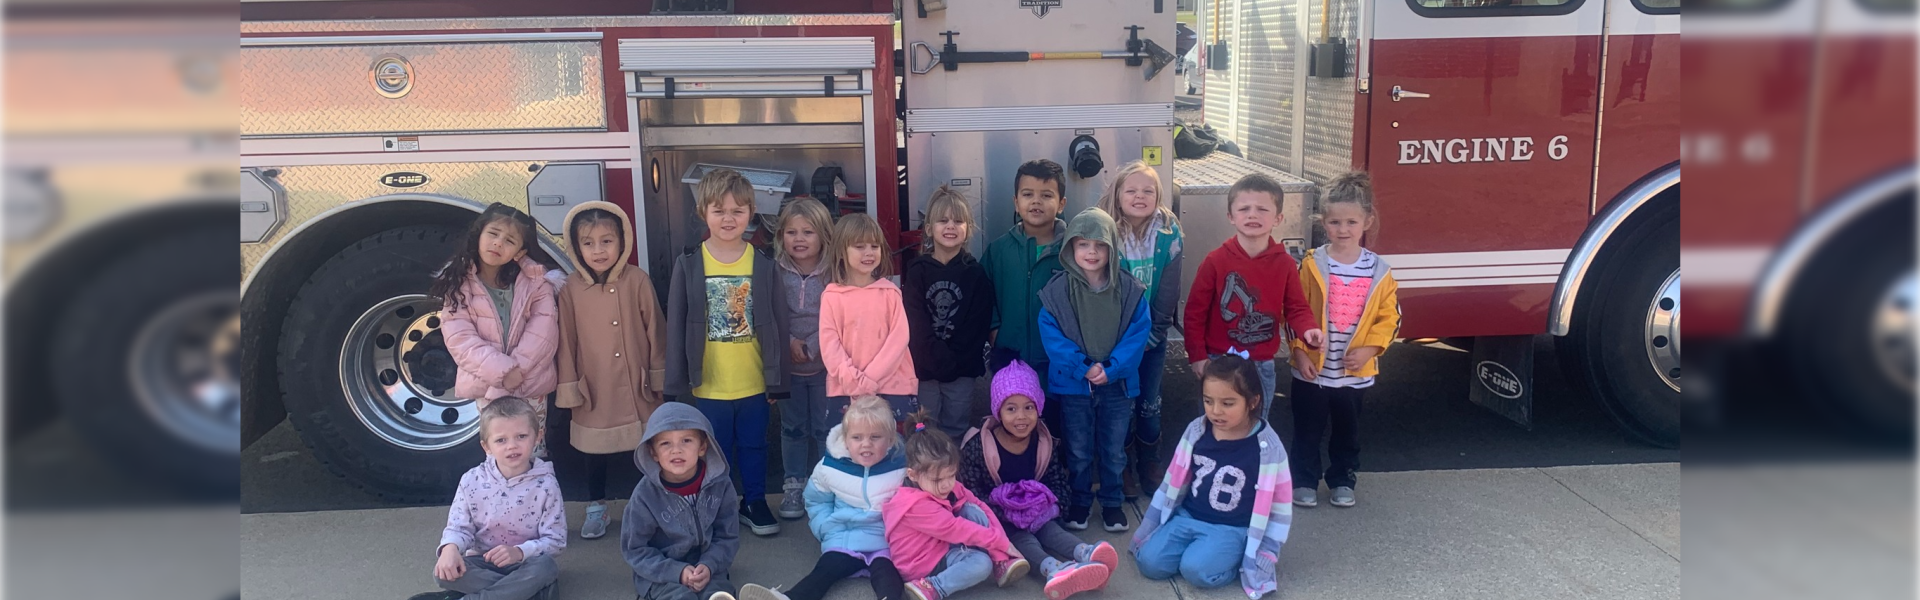 NWES Fire Safety 11-22